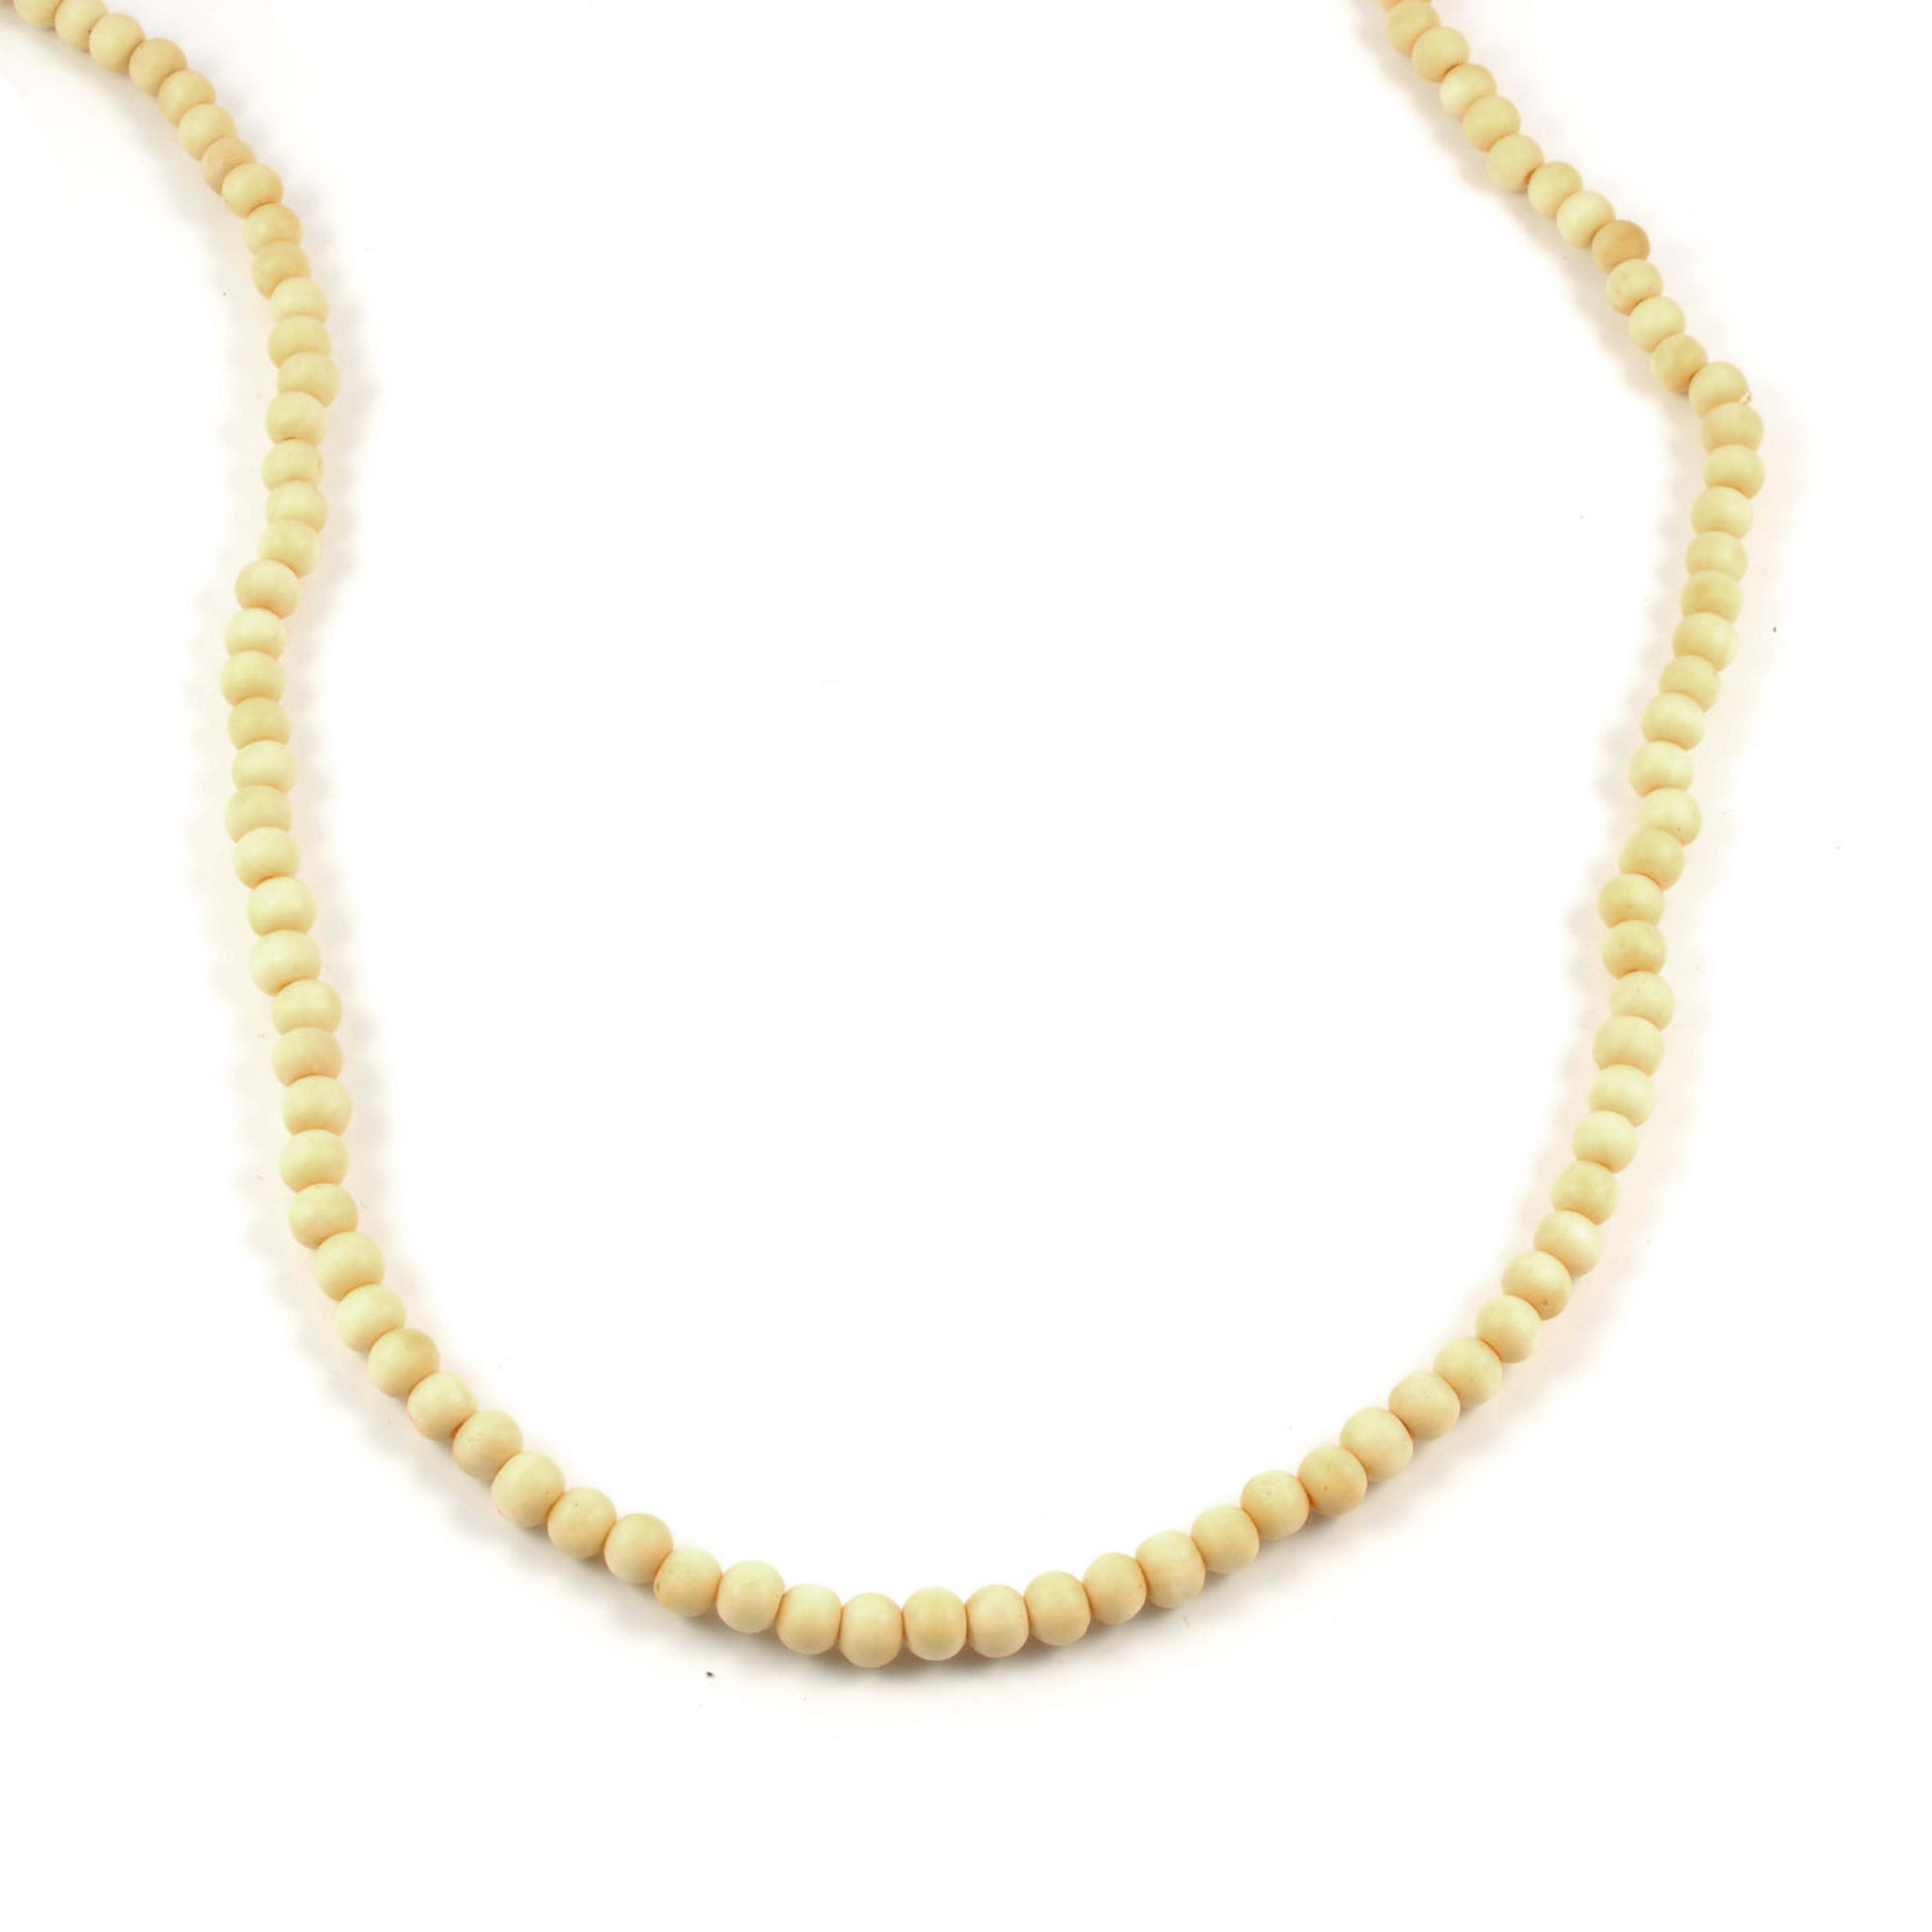 Cream Wooden Pearl Necklace